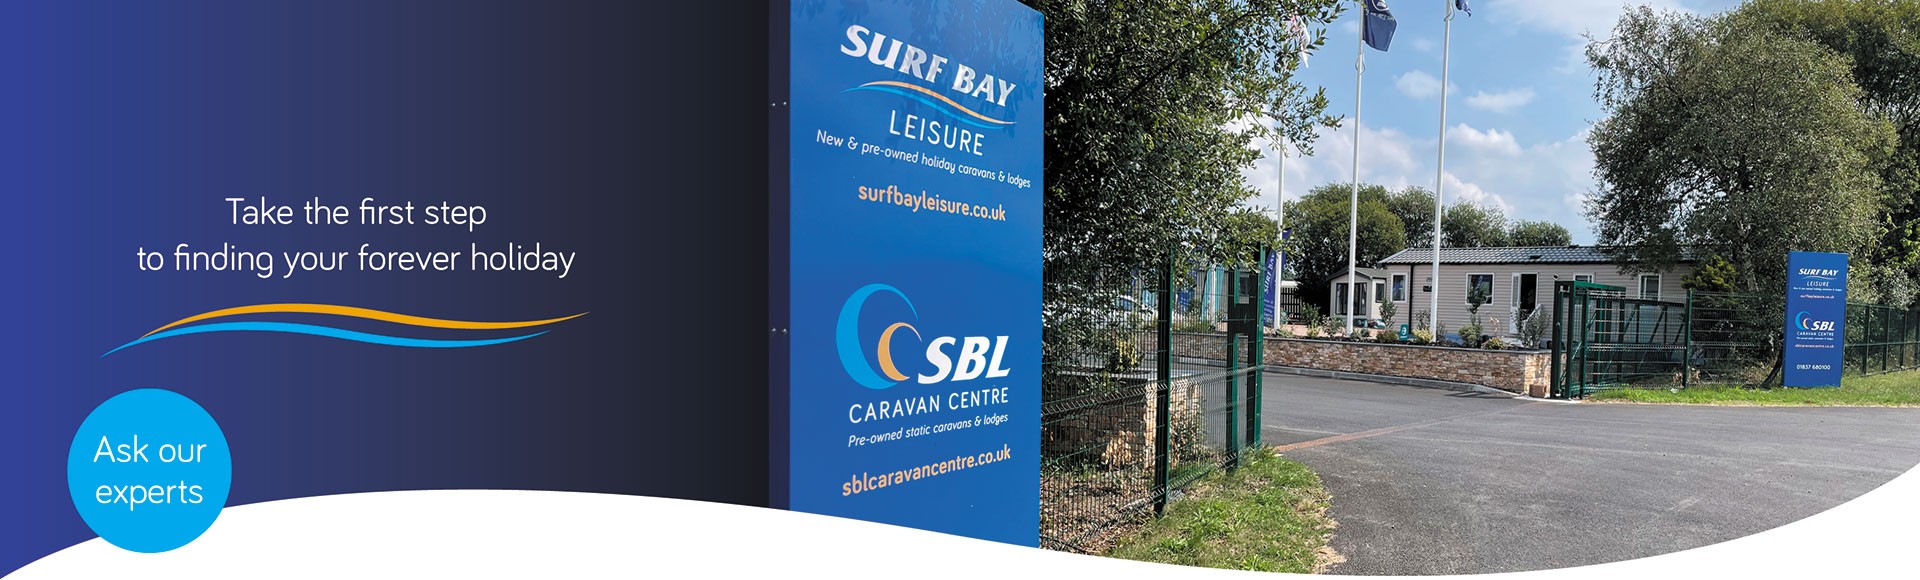 Contact Surfbay Leisure